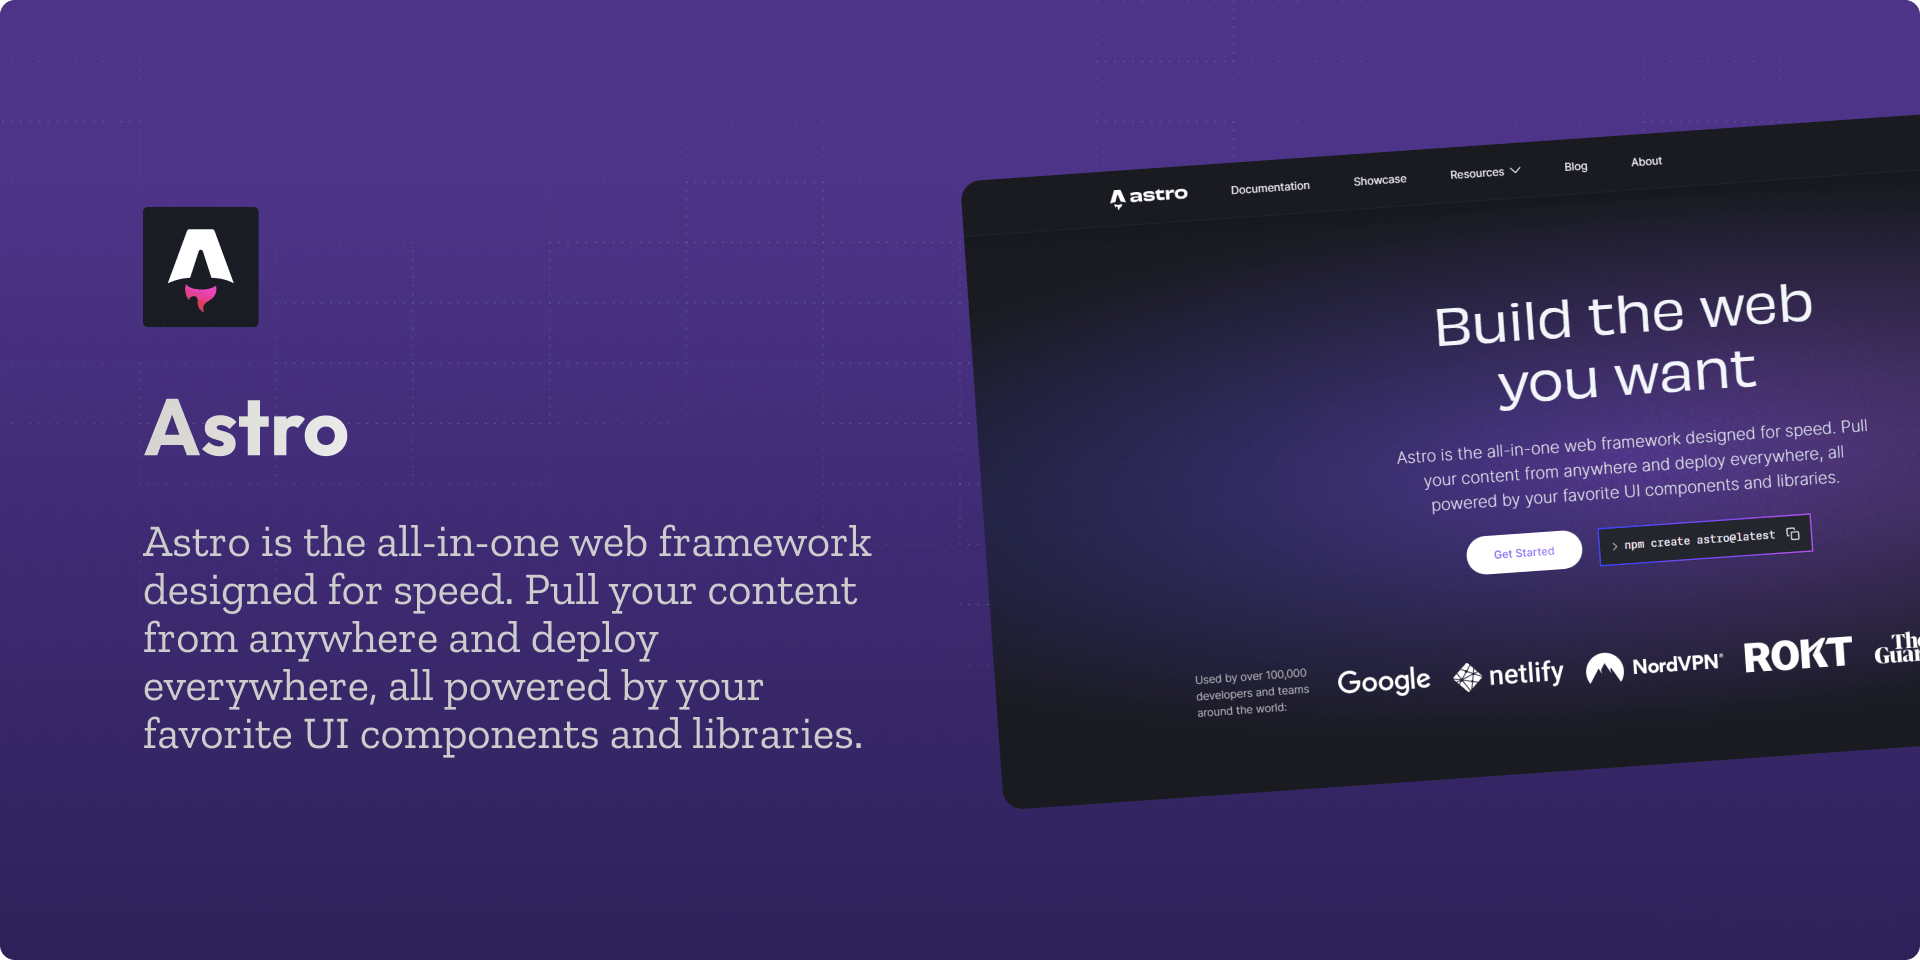 Astro is the all-in-one web framework designed for speed. Pull your content from anywhere and deploy everywhere, all powered by your favorite UI components and libraries.